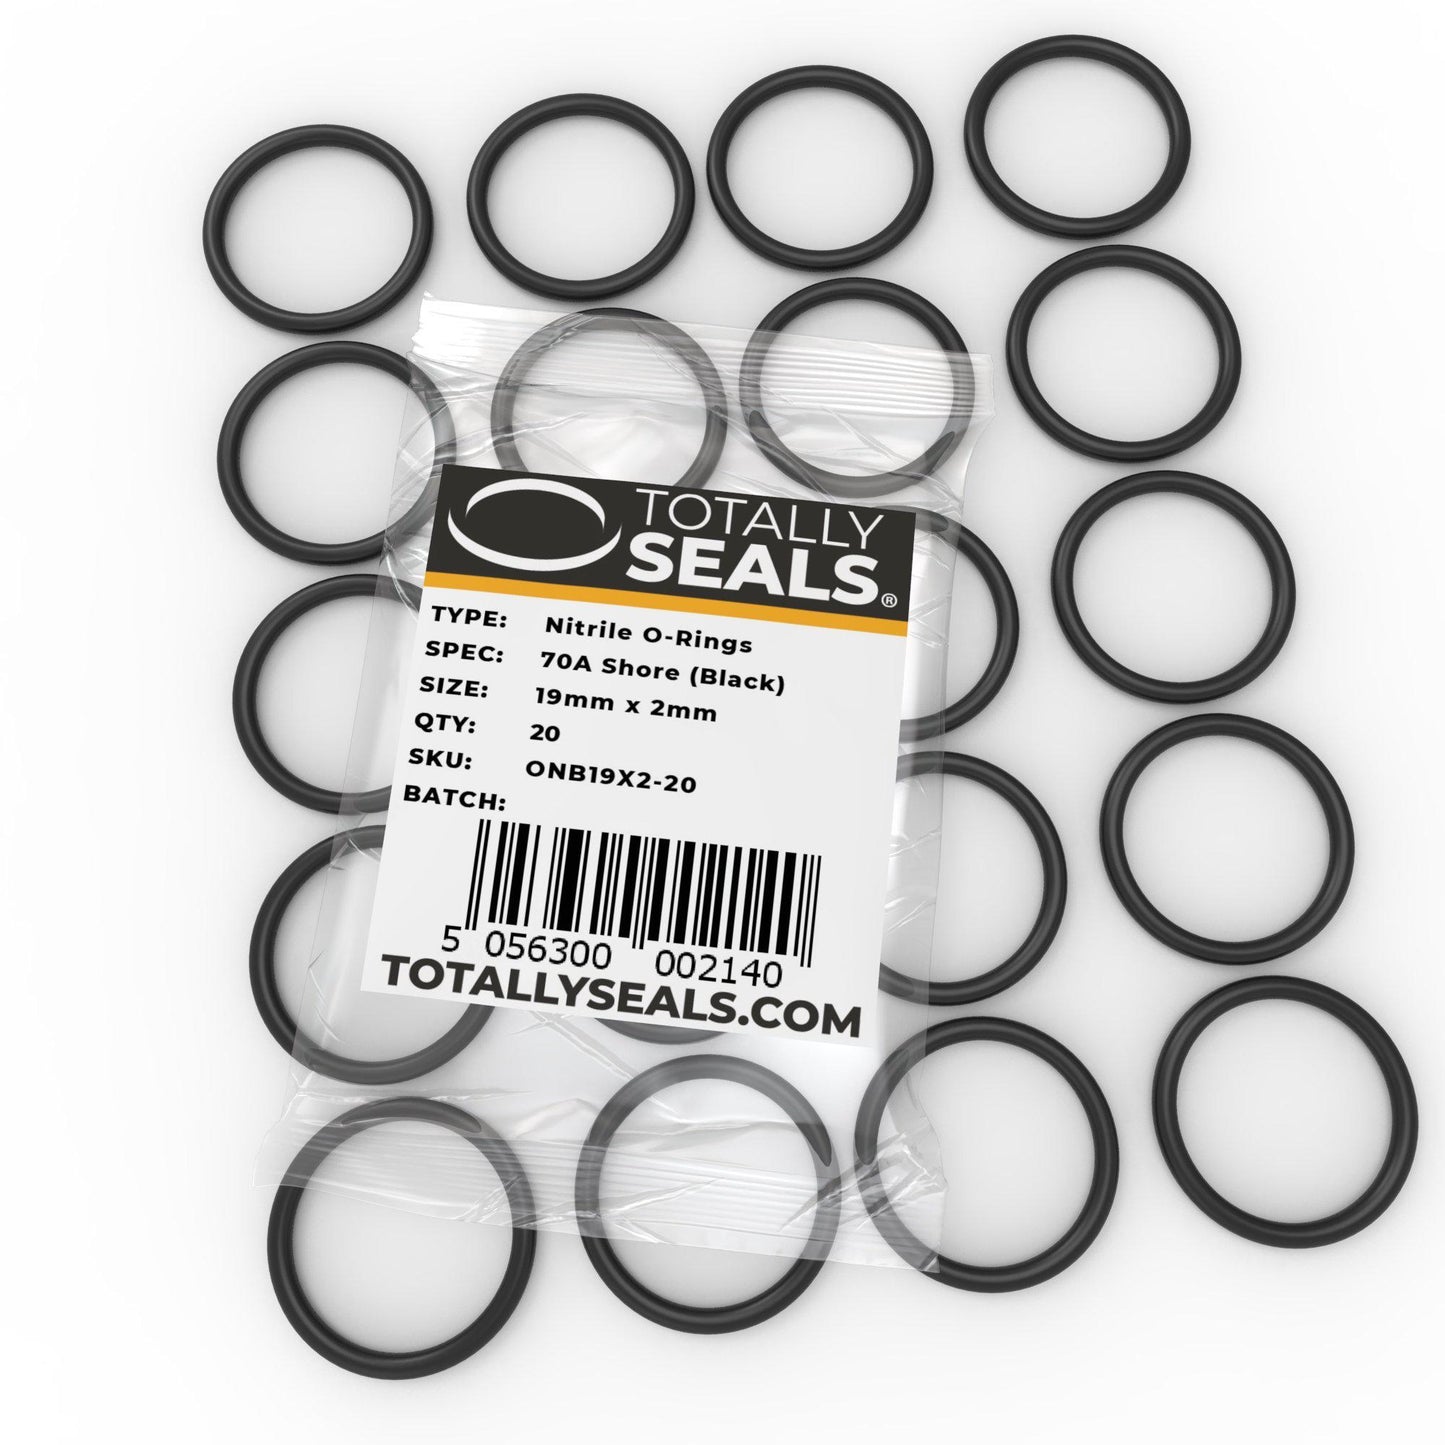 19mm x 2mm (23mm OD) Nitrile O-Rings - Totally Seals®